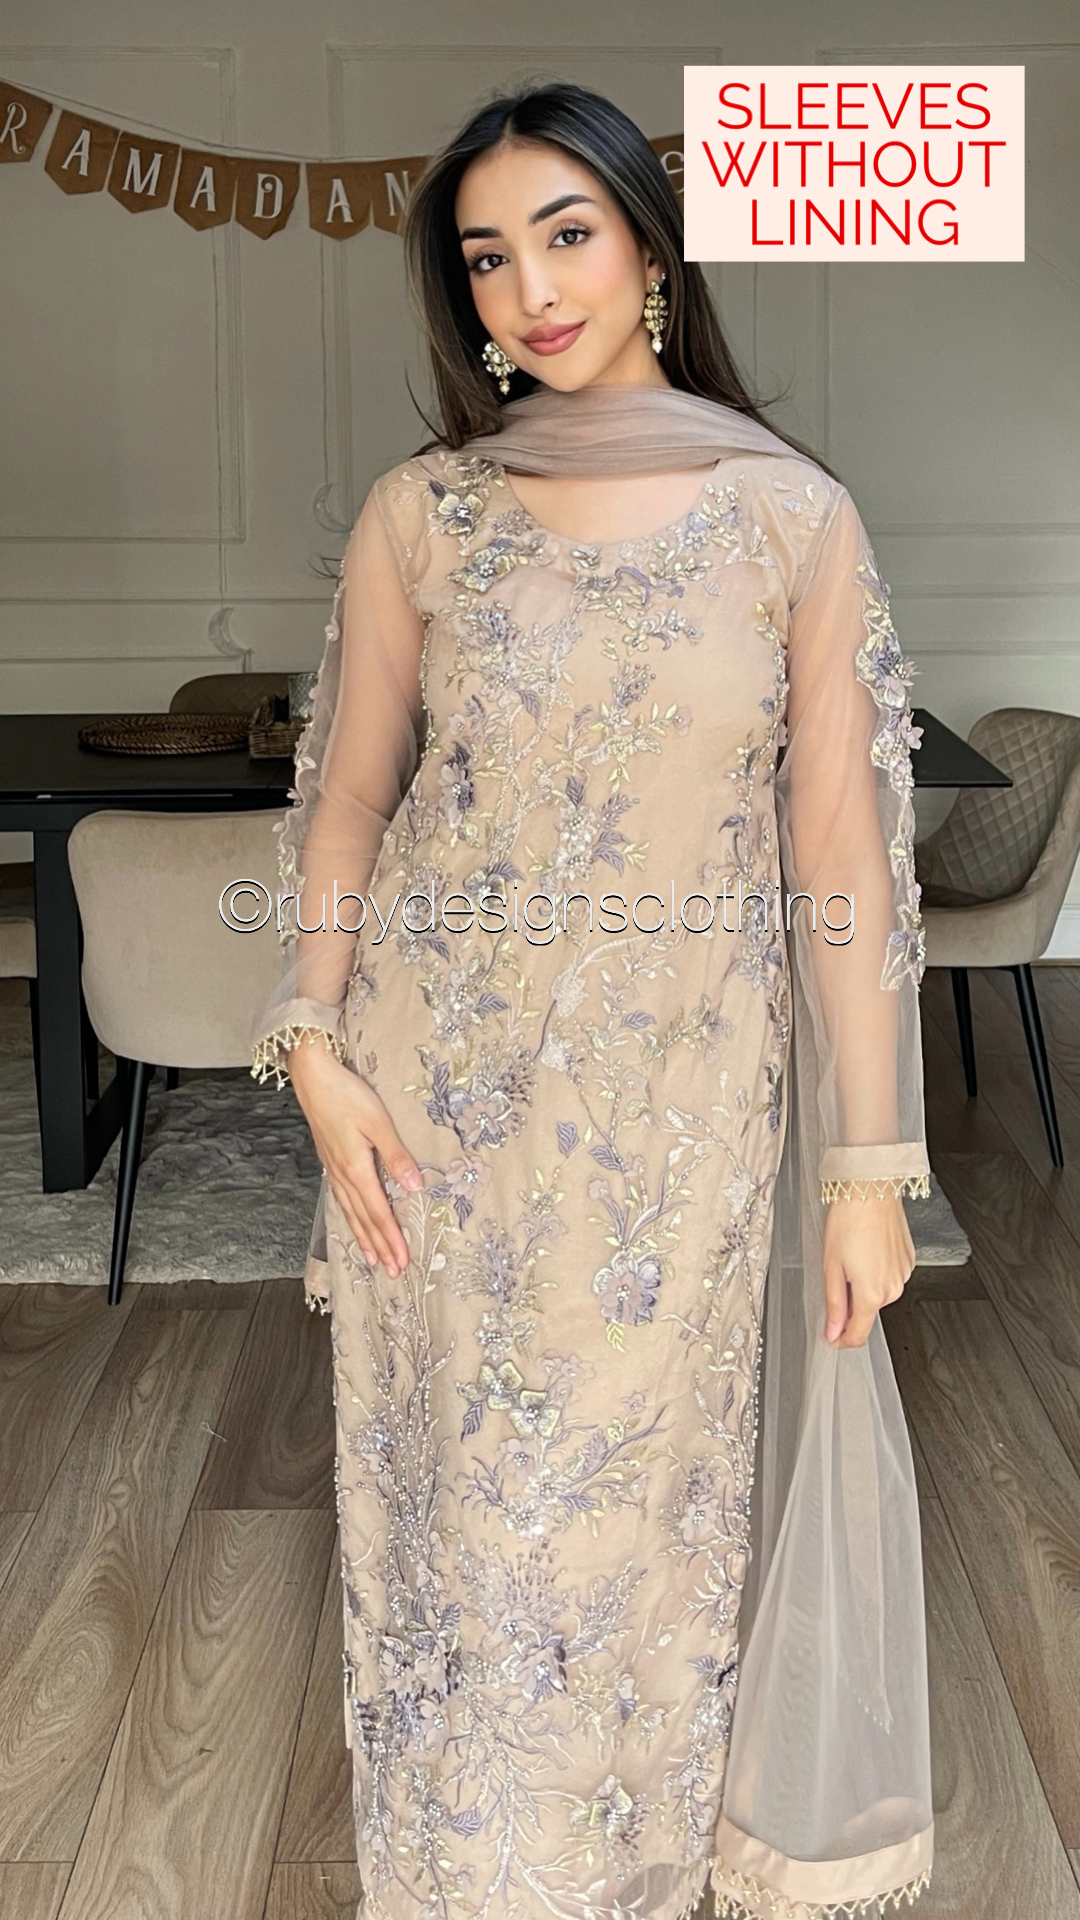 NABA - 3 Piece Latte Net Suit with 3D Detailing